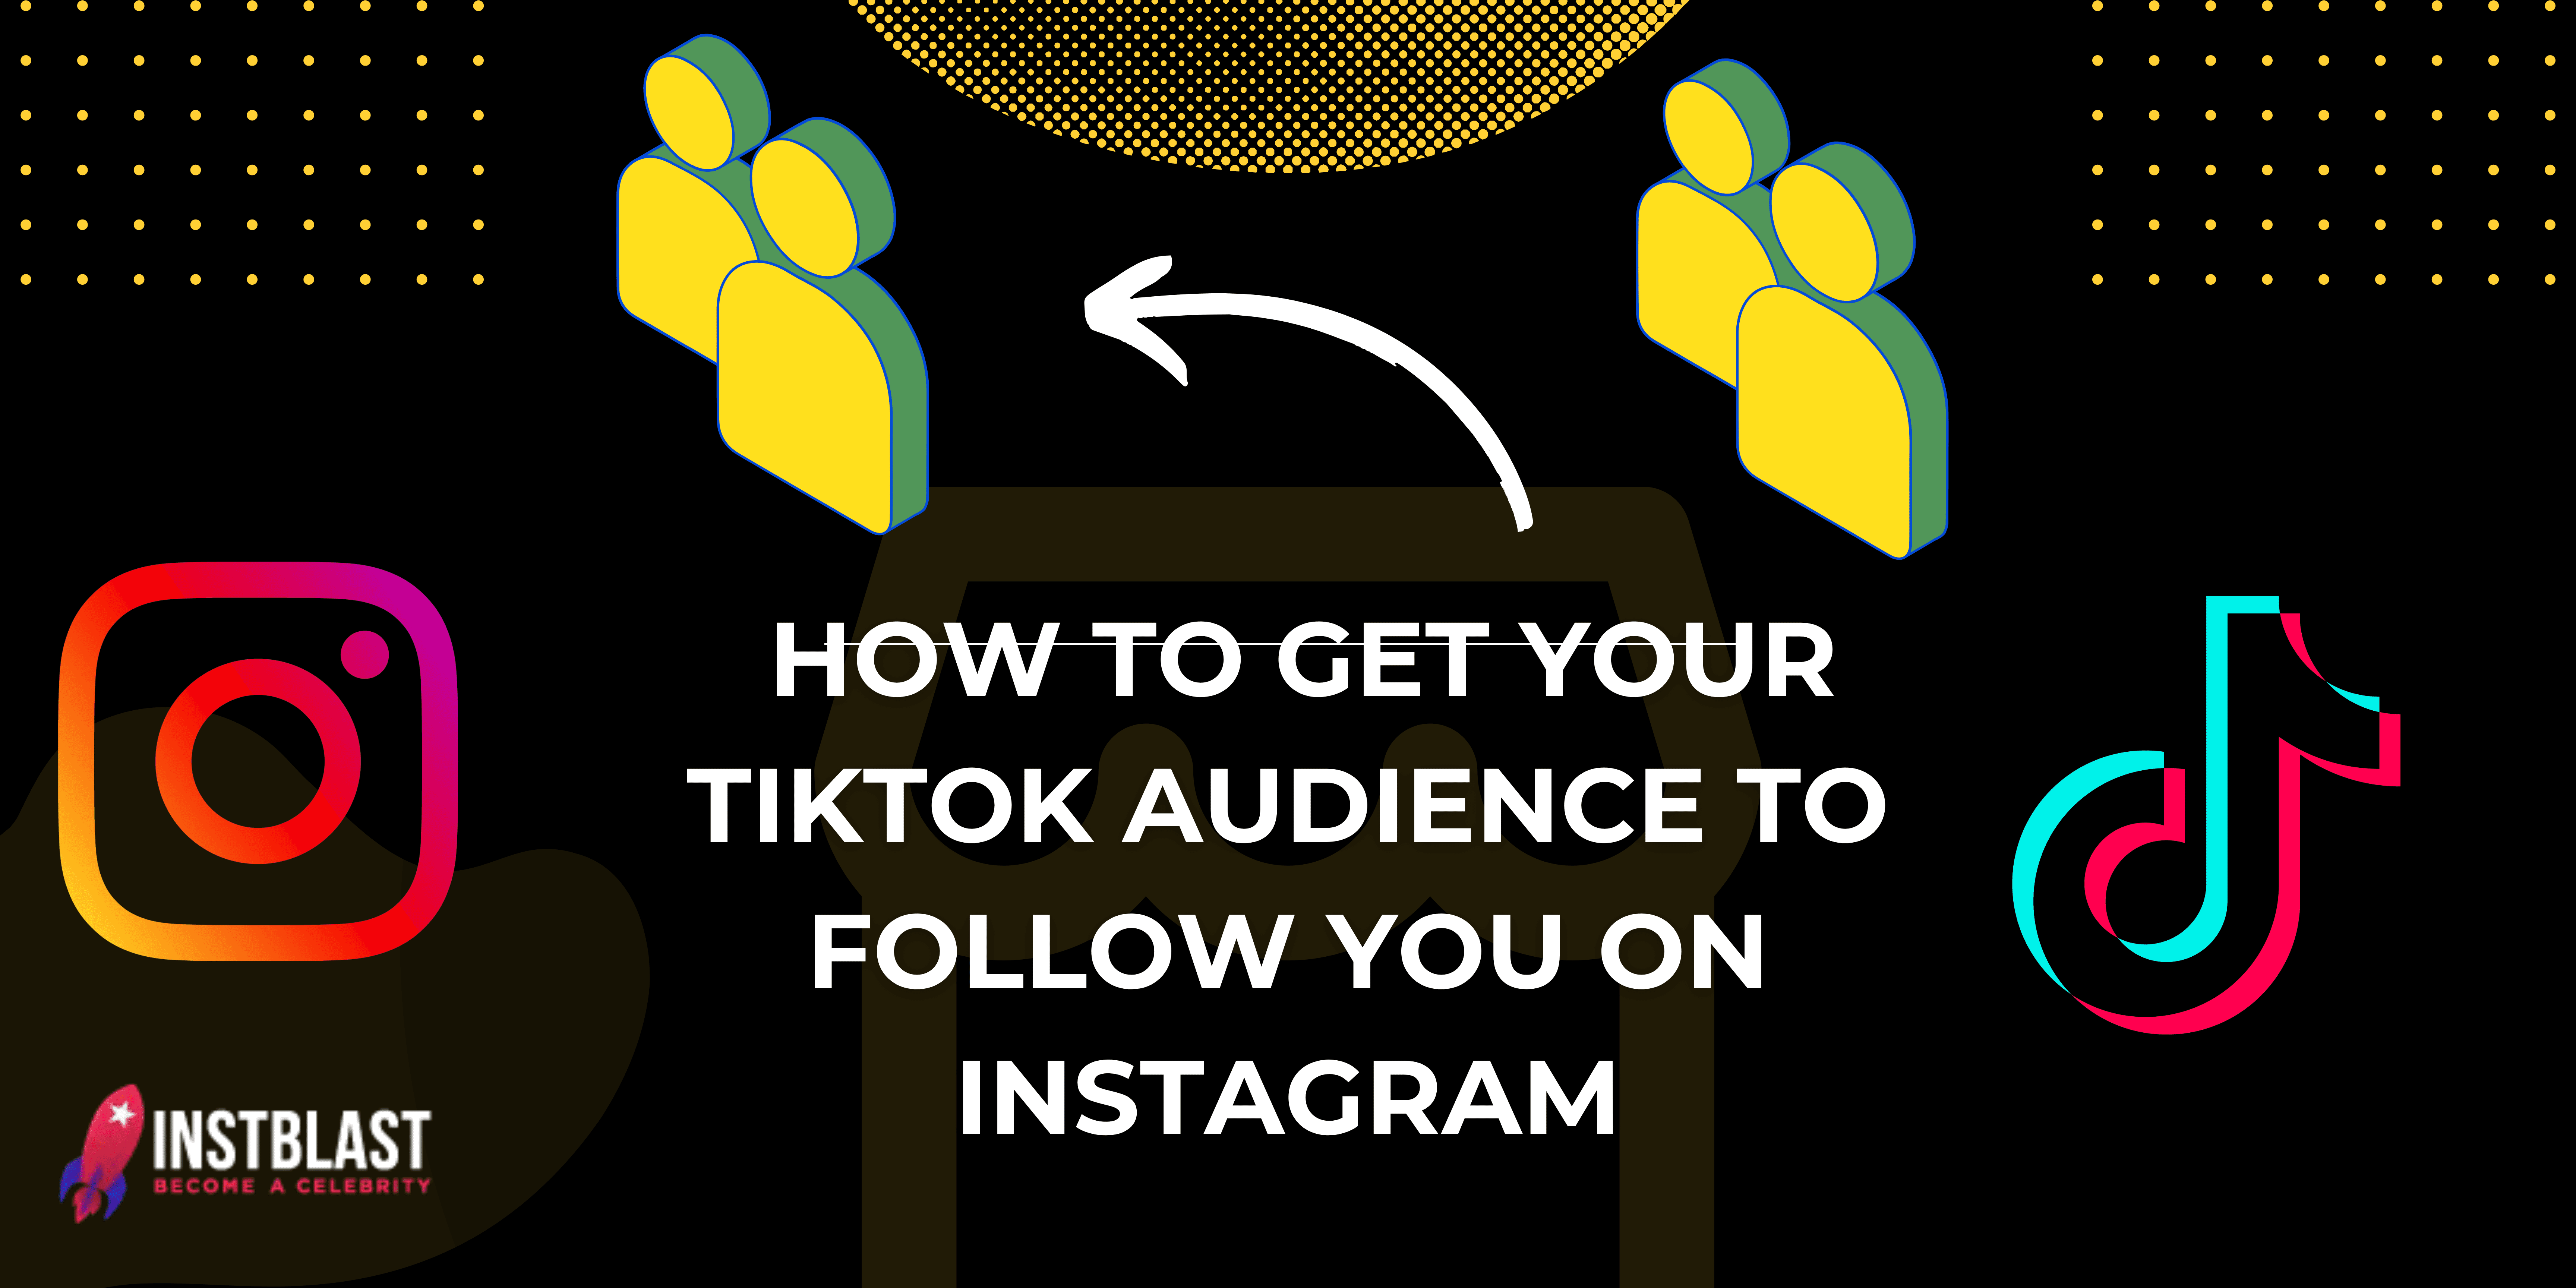  How to Get Your TikTok Audience to Follow You on Instagram